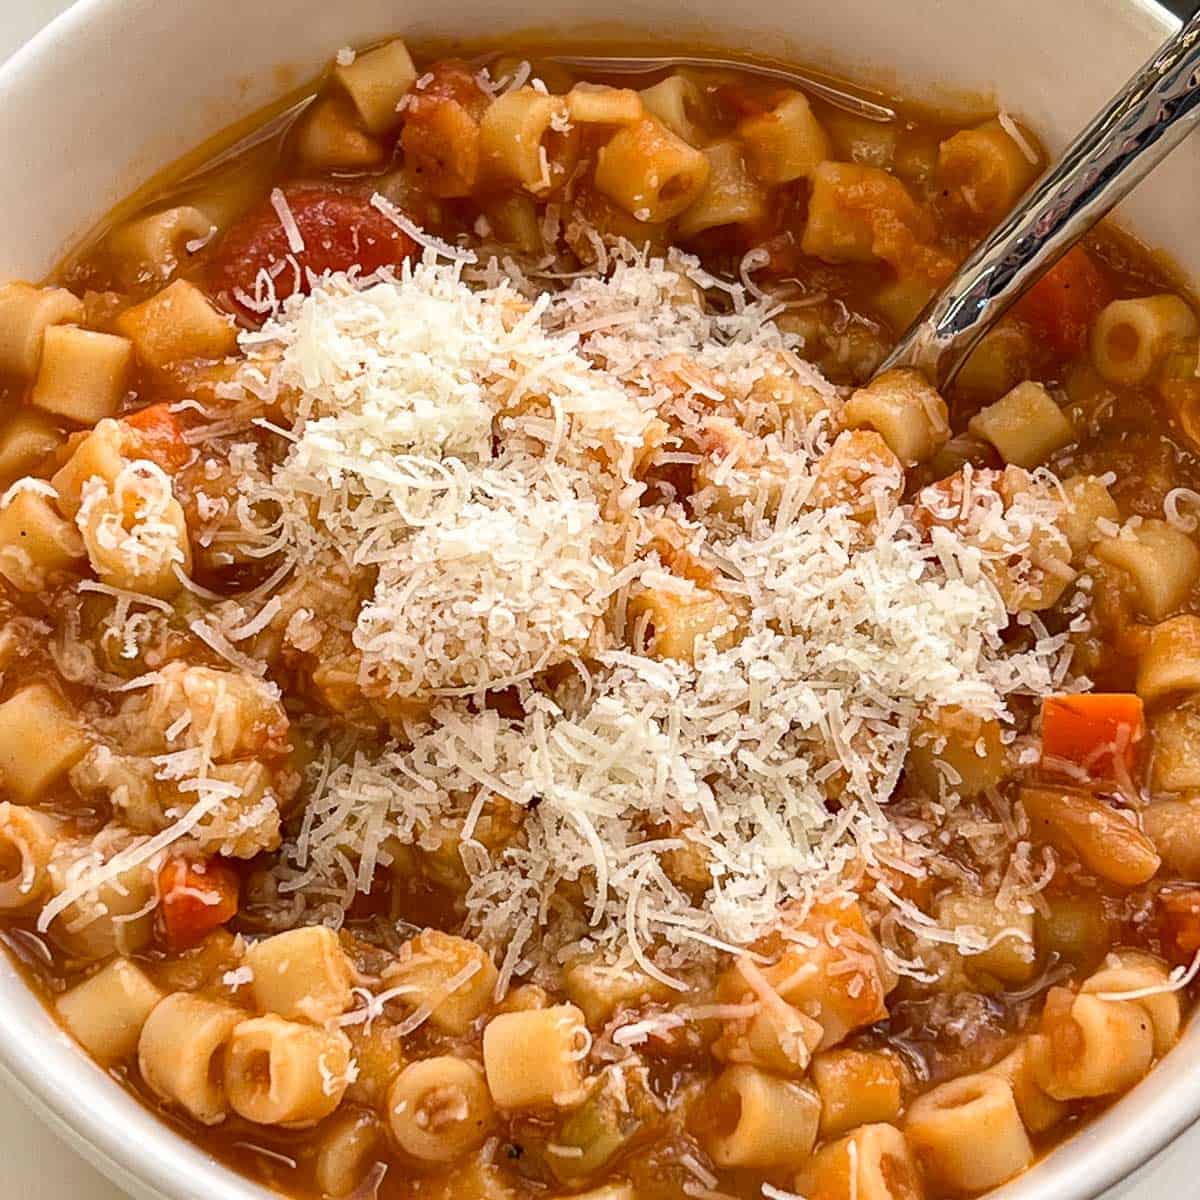 Image of a bowl of Pasta Fagioli with a hunk of bread.